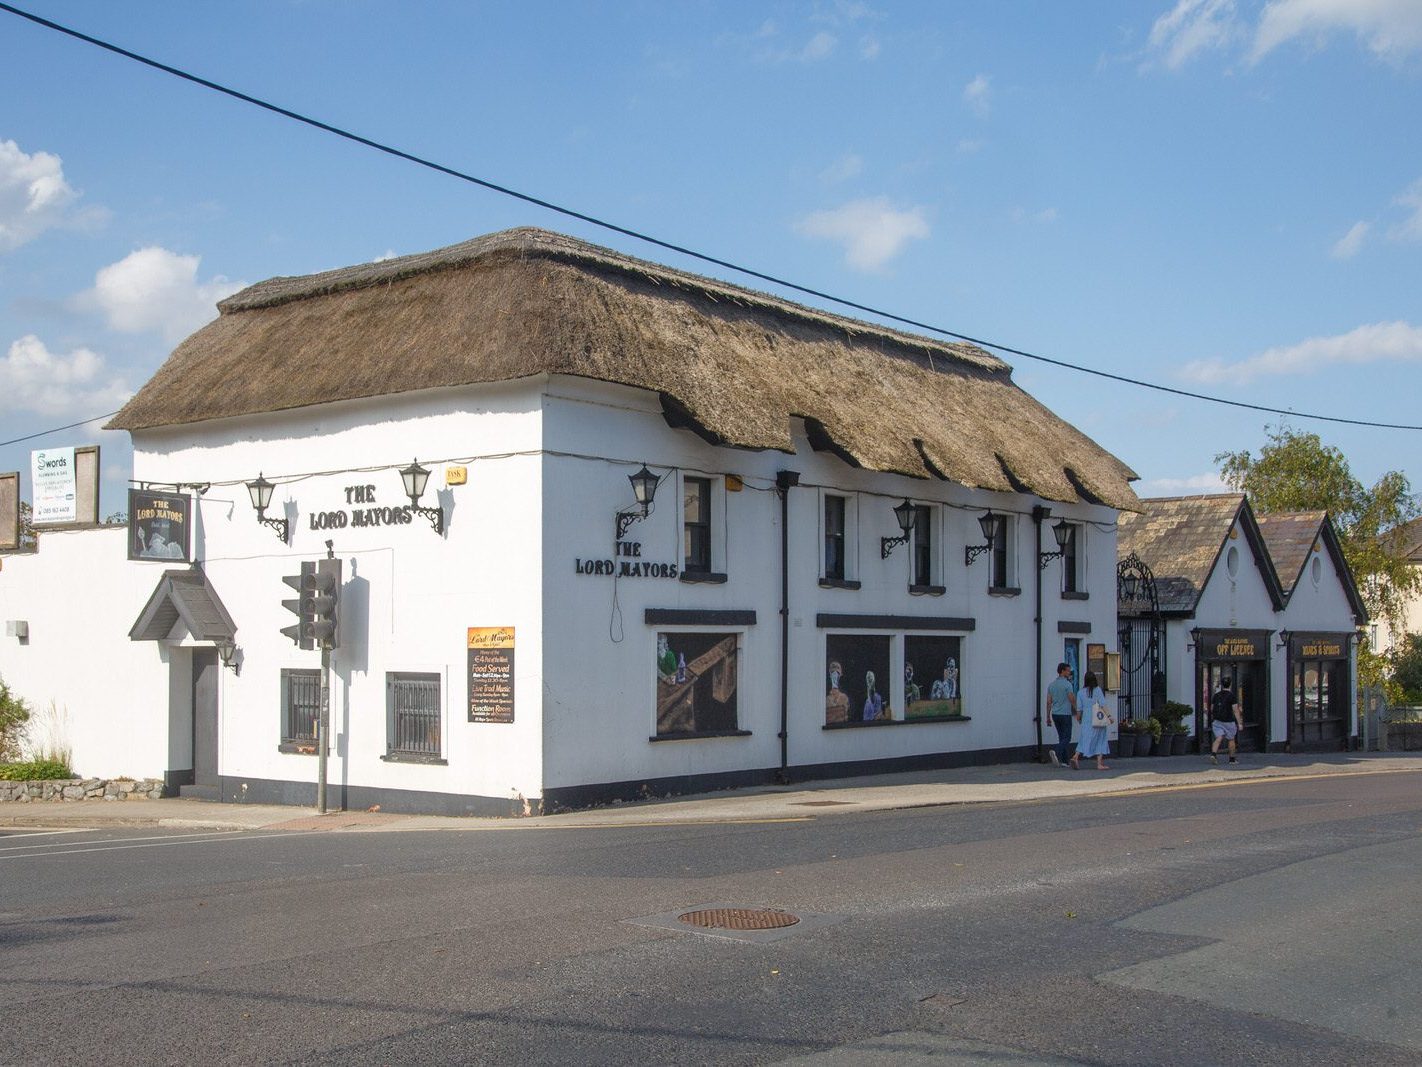 THE LORD MAYOR'S PUB IS TO BE DEMOLISHED [I VISITED SWORDS IN ORDER TO PHOTOGRAPH THIS THATCHED PUB] 001